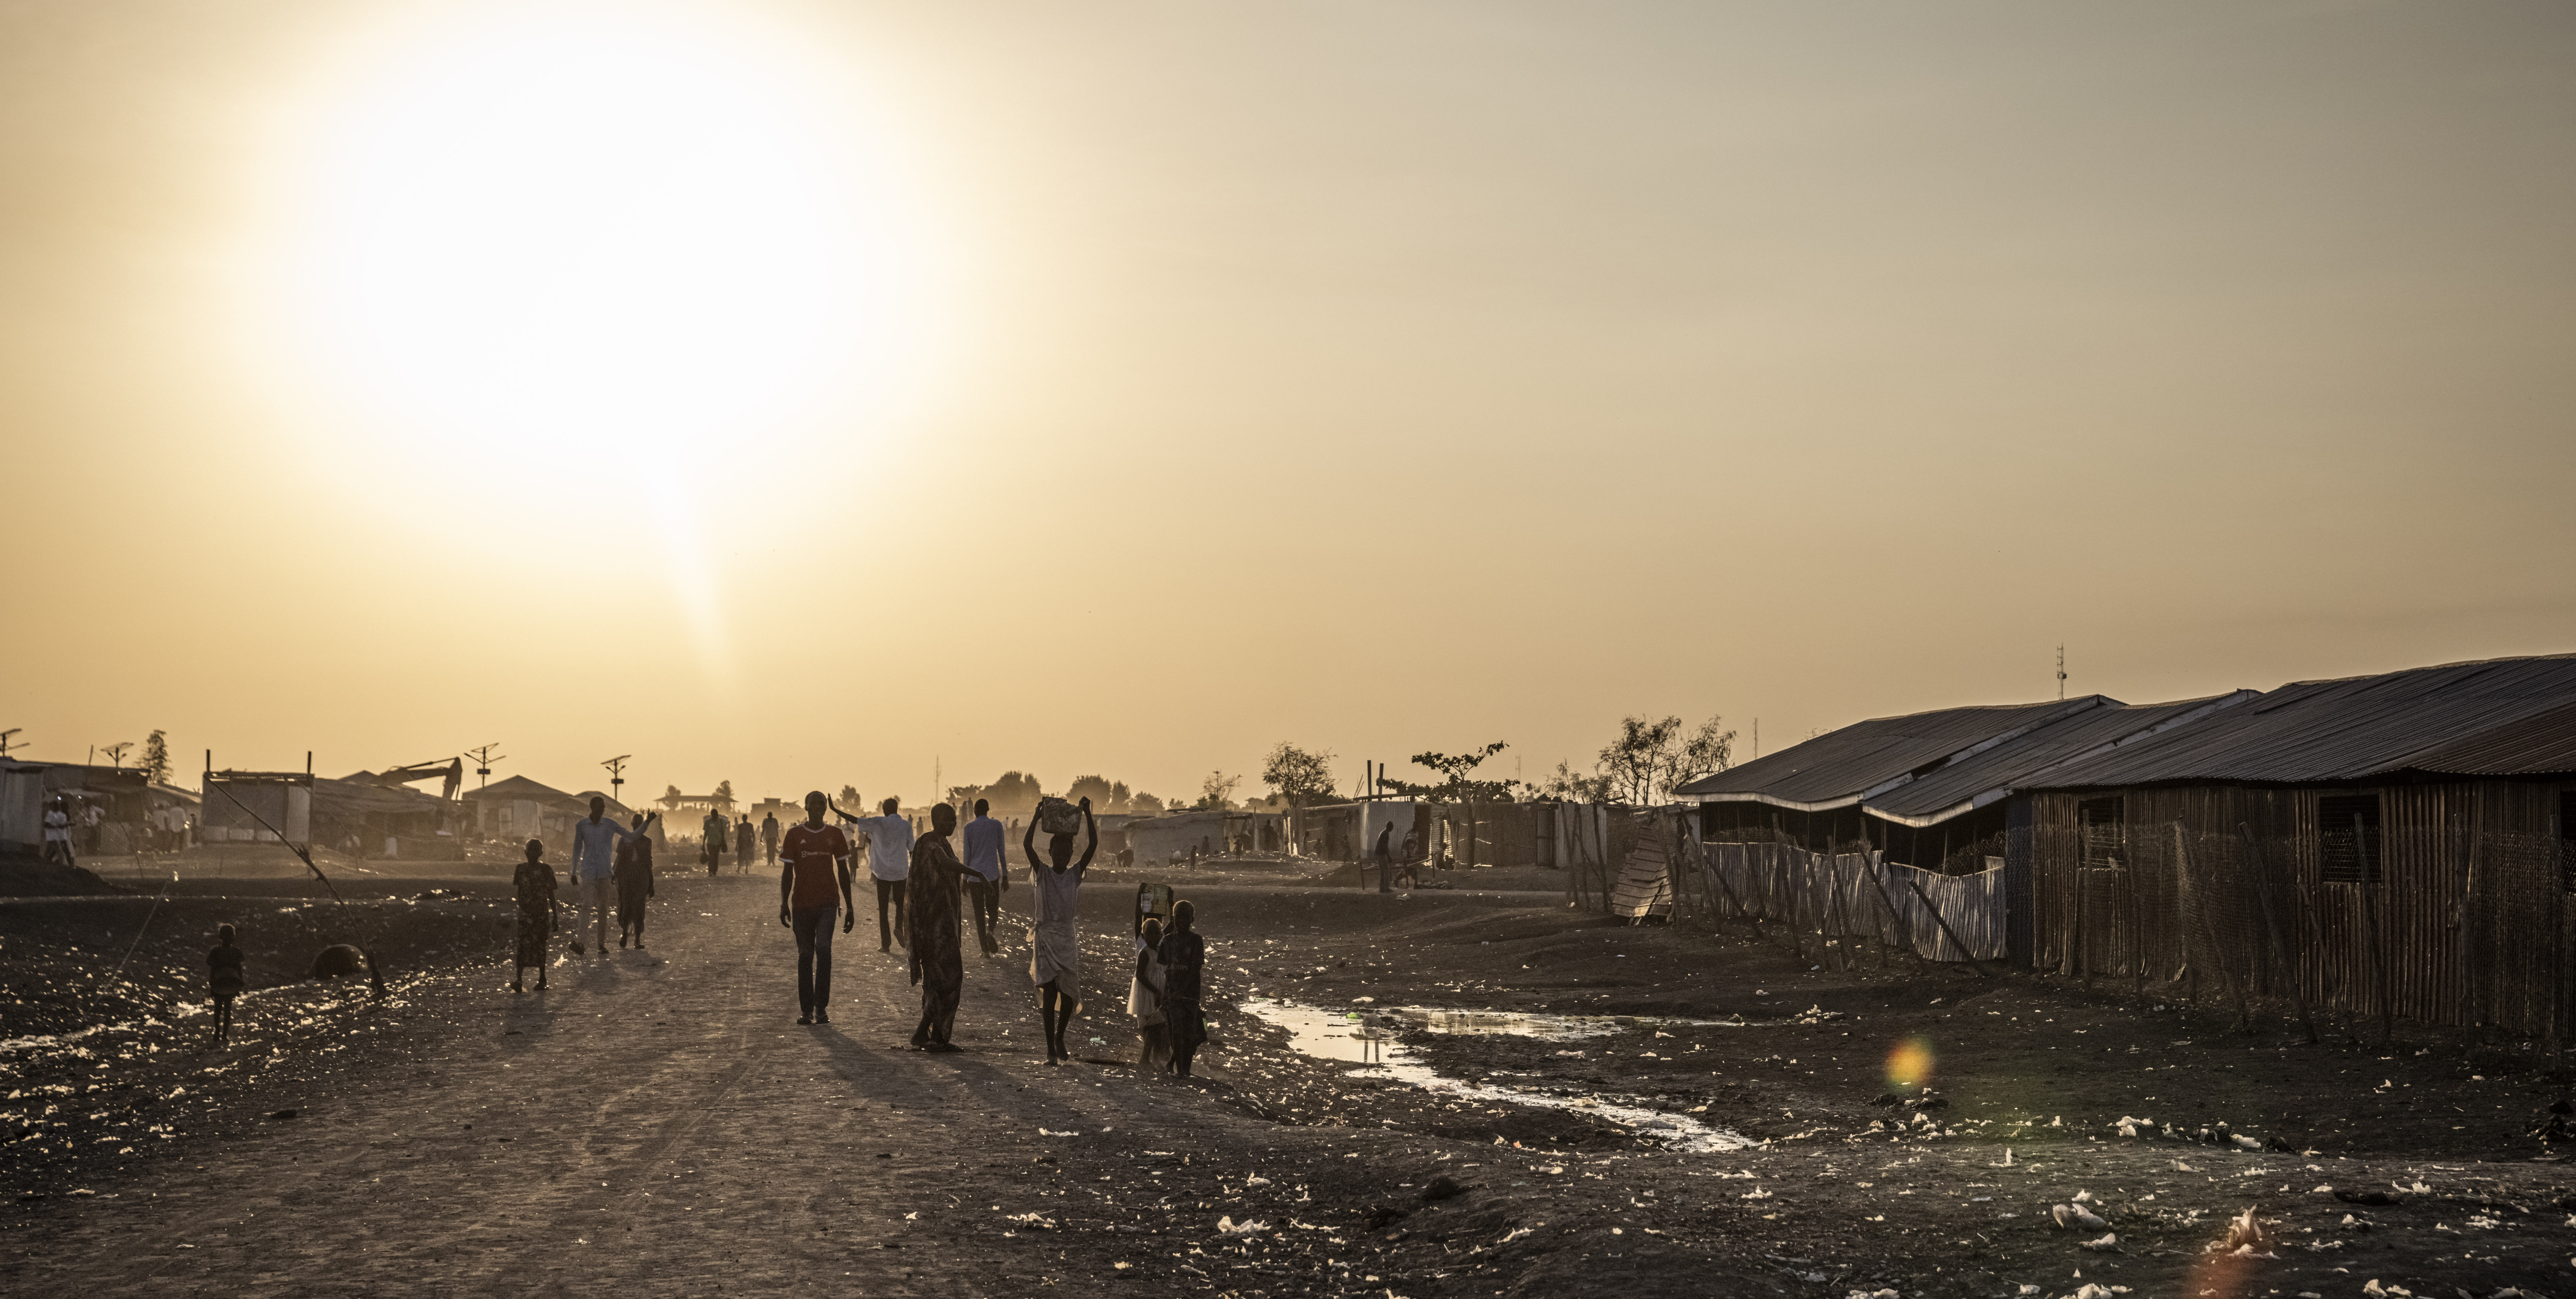 The sun sets at an IDP site in Bentiu in South Sudan's Unity State